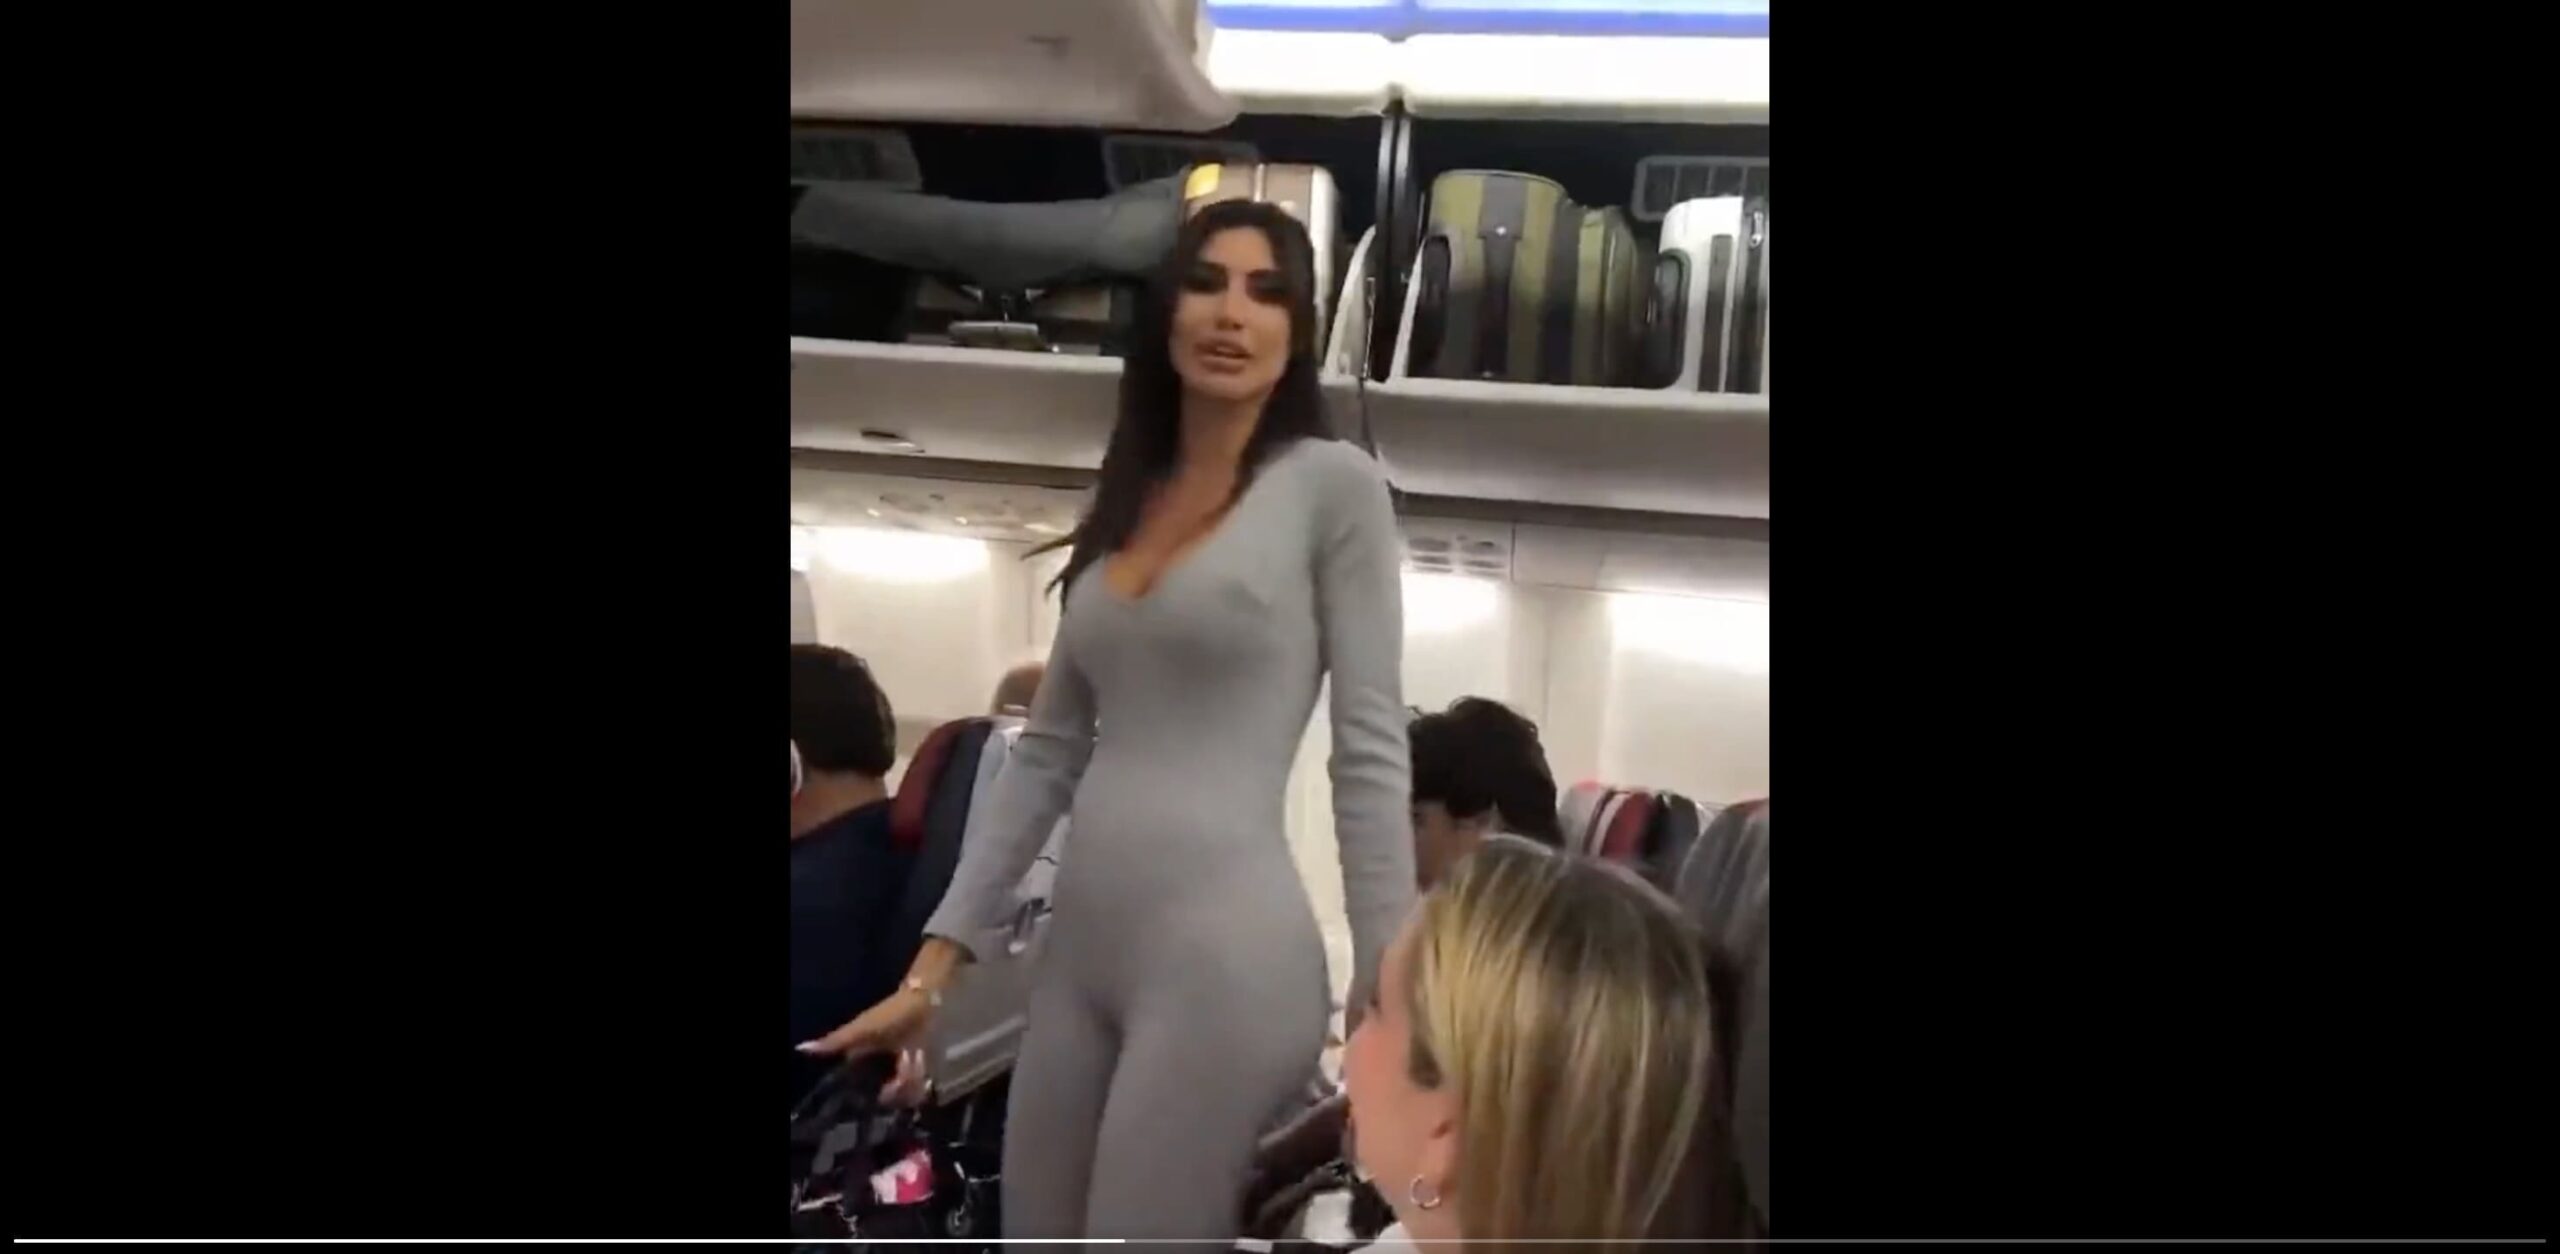 “I’m Instagram Famous, You F***ing Bum” – Entitled “Influencer” Suffers Meltdown Following Argument with Fellow Passenger and is Kicked Off Plane (VIDEO)